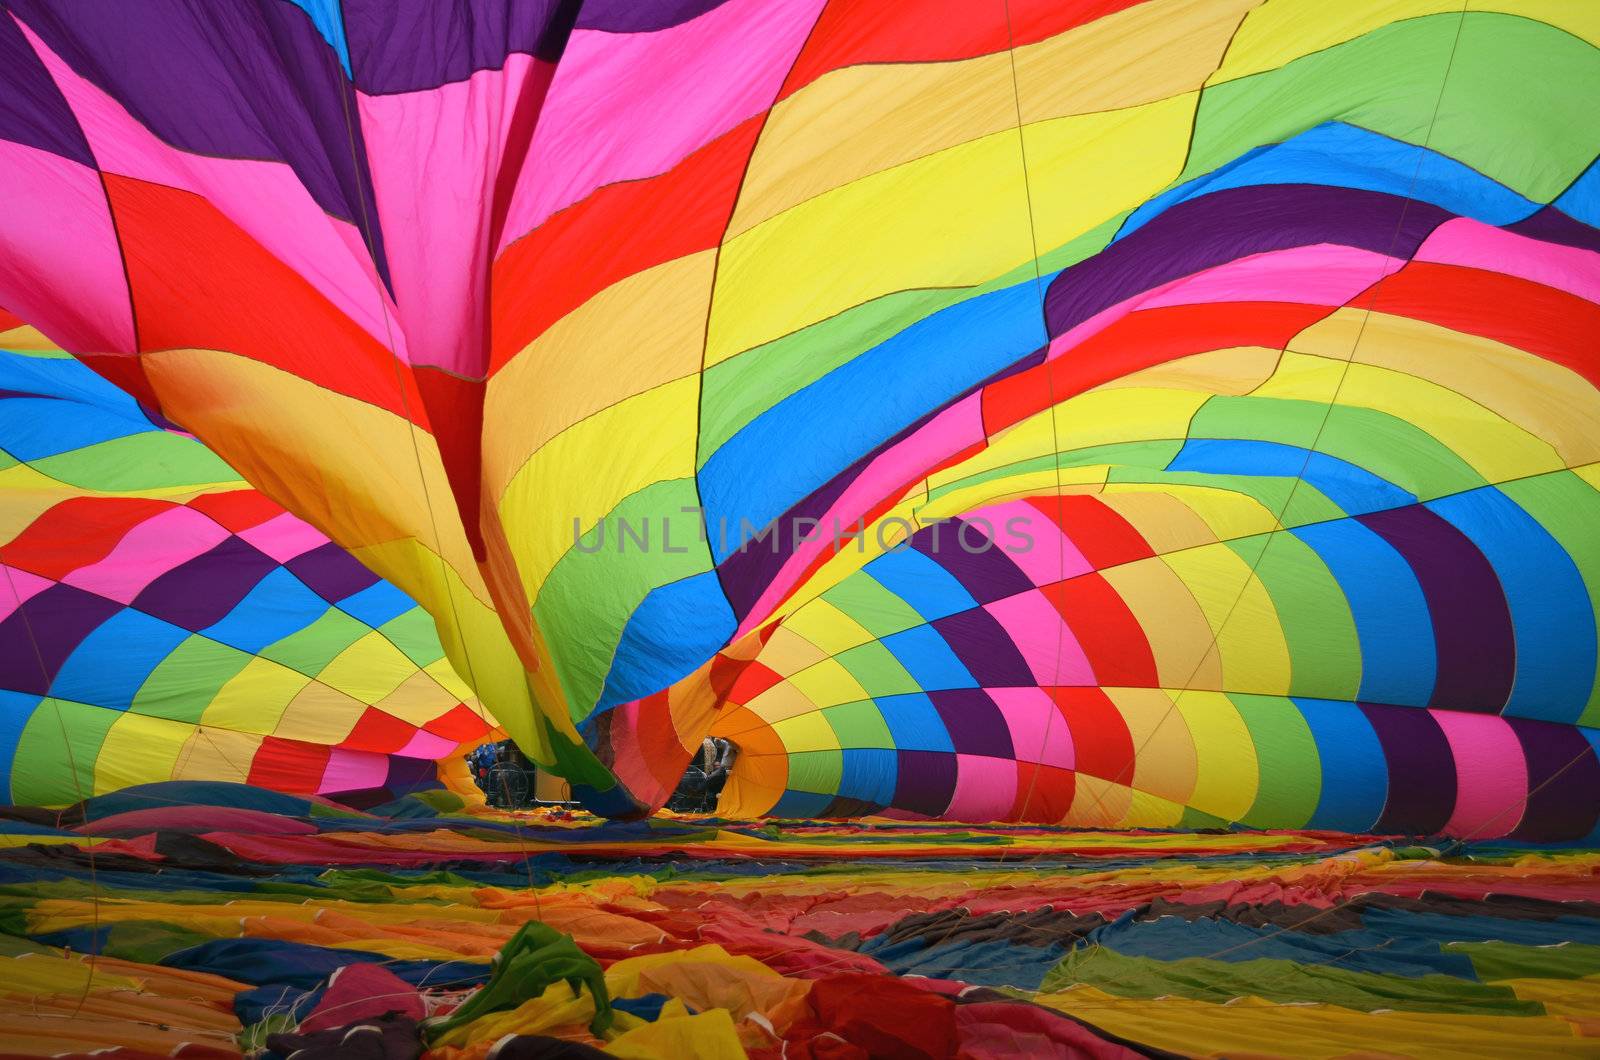 Hot air ballon being inflated on the ground